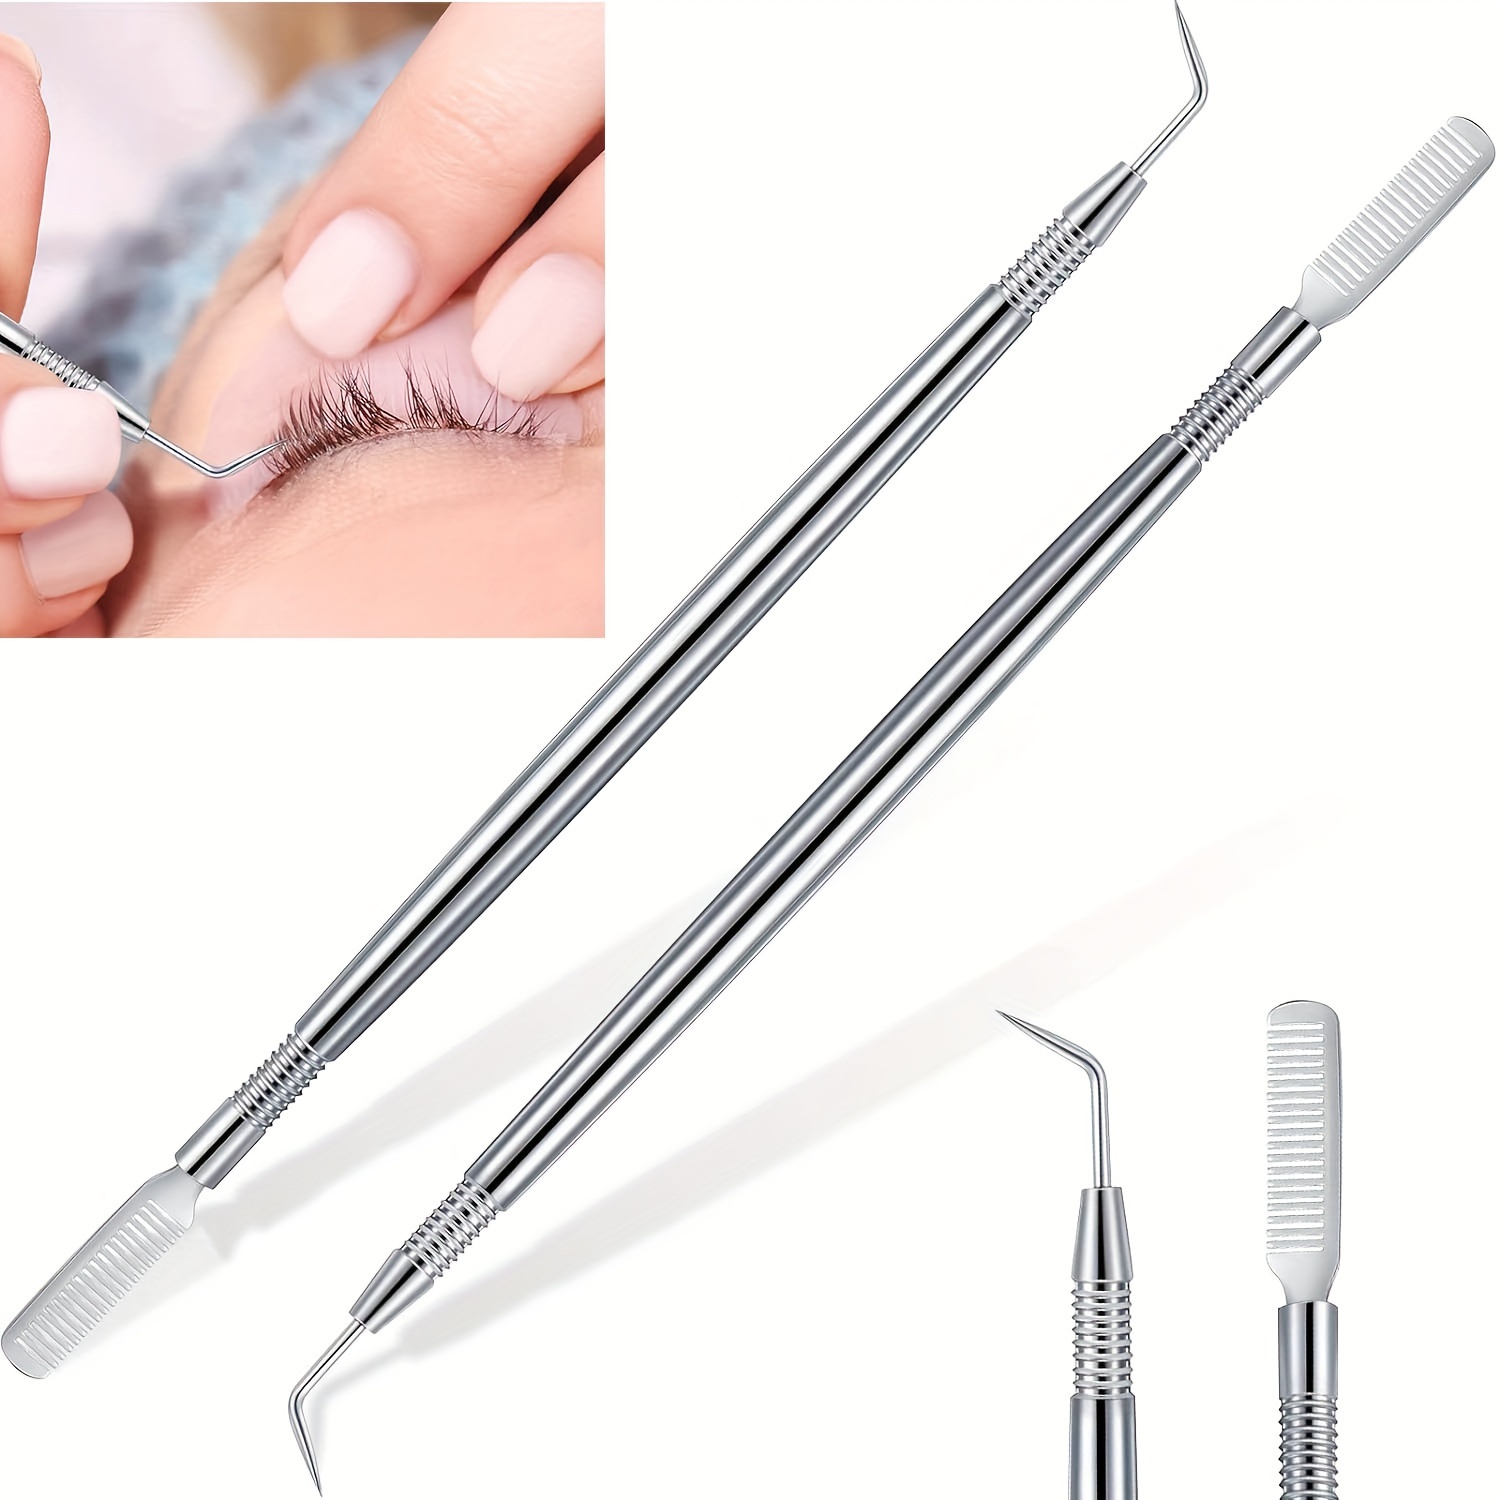 

Eyelash Lift & Perm Kit - 1/2 Pcs Stainless Steel Rods With Brush For Lash And Brow Perming, Tinting, Curling & Extensions - Professional Salon Quality, Silvery